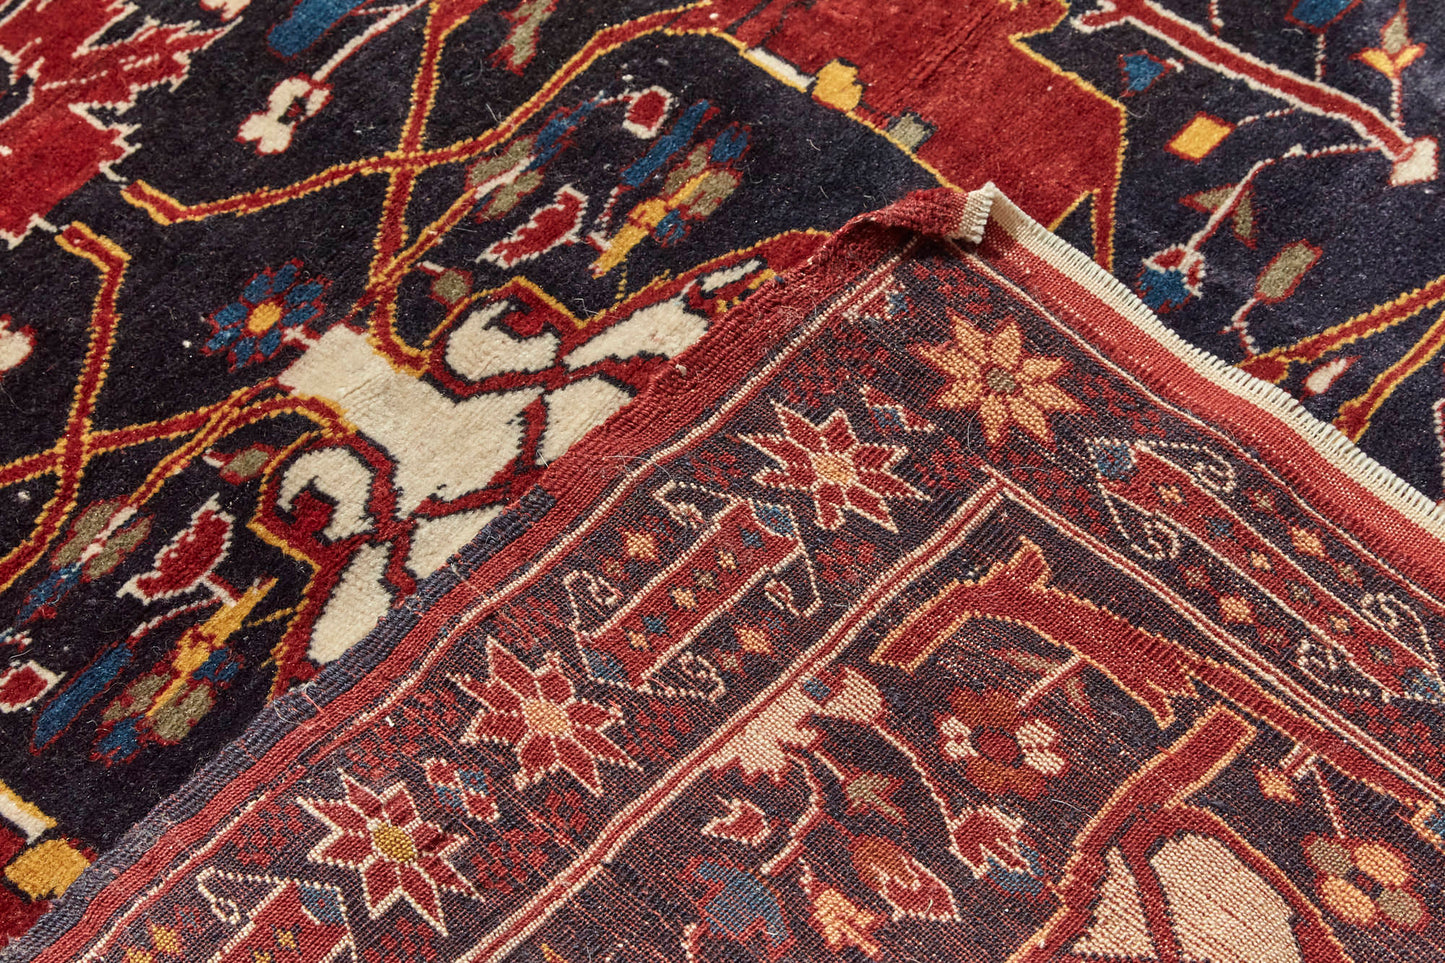 Front and back of Antique Bidjar Persian Rug Sampler, hand woven with dark blue base and red, cream, gold and lighter blue shapes, beautiful piece in excellent condition for a study, bedroom or foyer rug - Available from King Kennedy Rugs Los Angeles